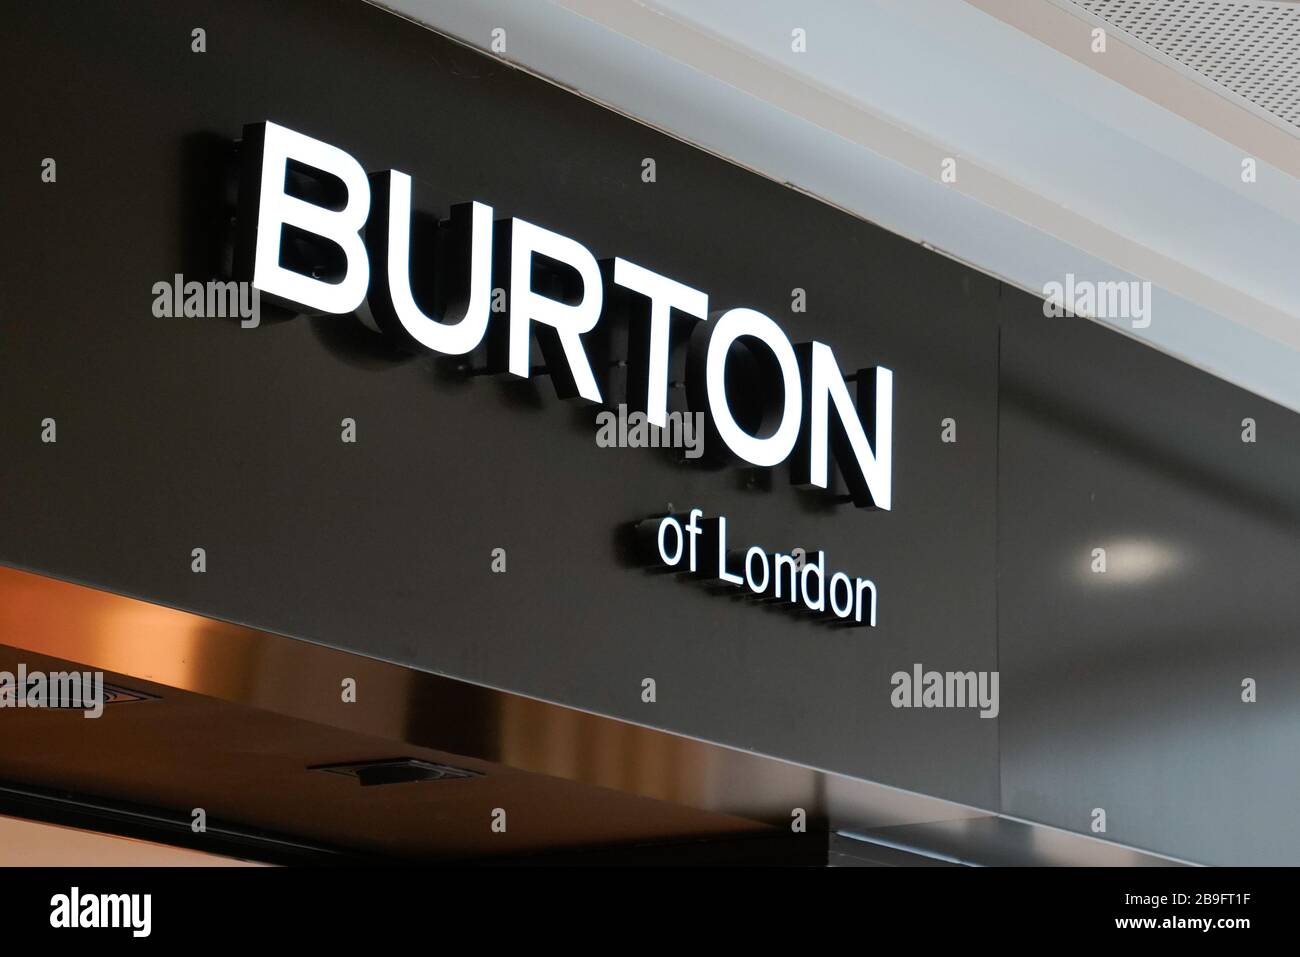 Bordeaux , Aquitaine / France - 09 24 2019 : clothing shop Burton of london  sign on store front in the street Stock Photo - Alamy